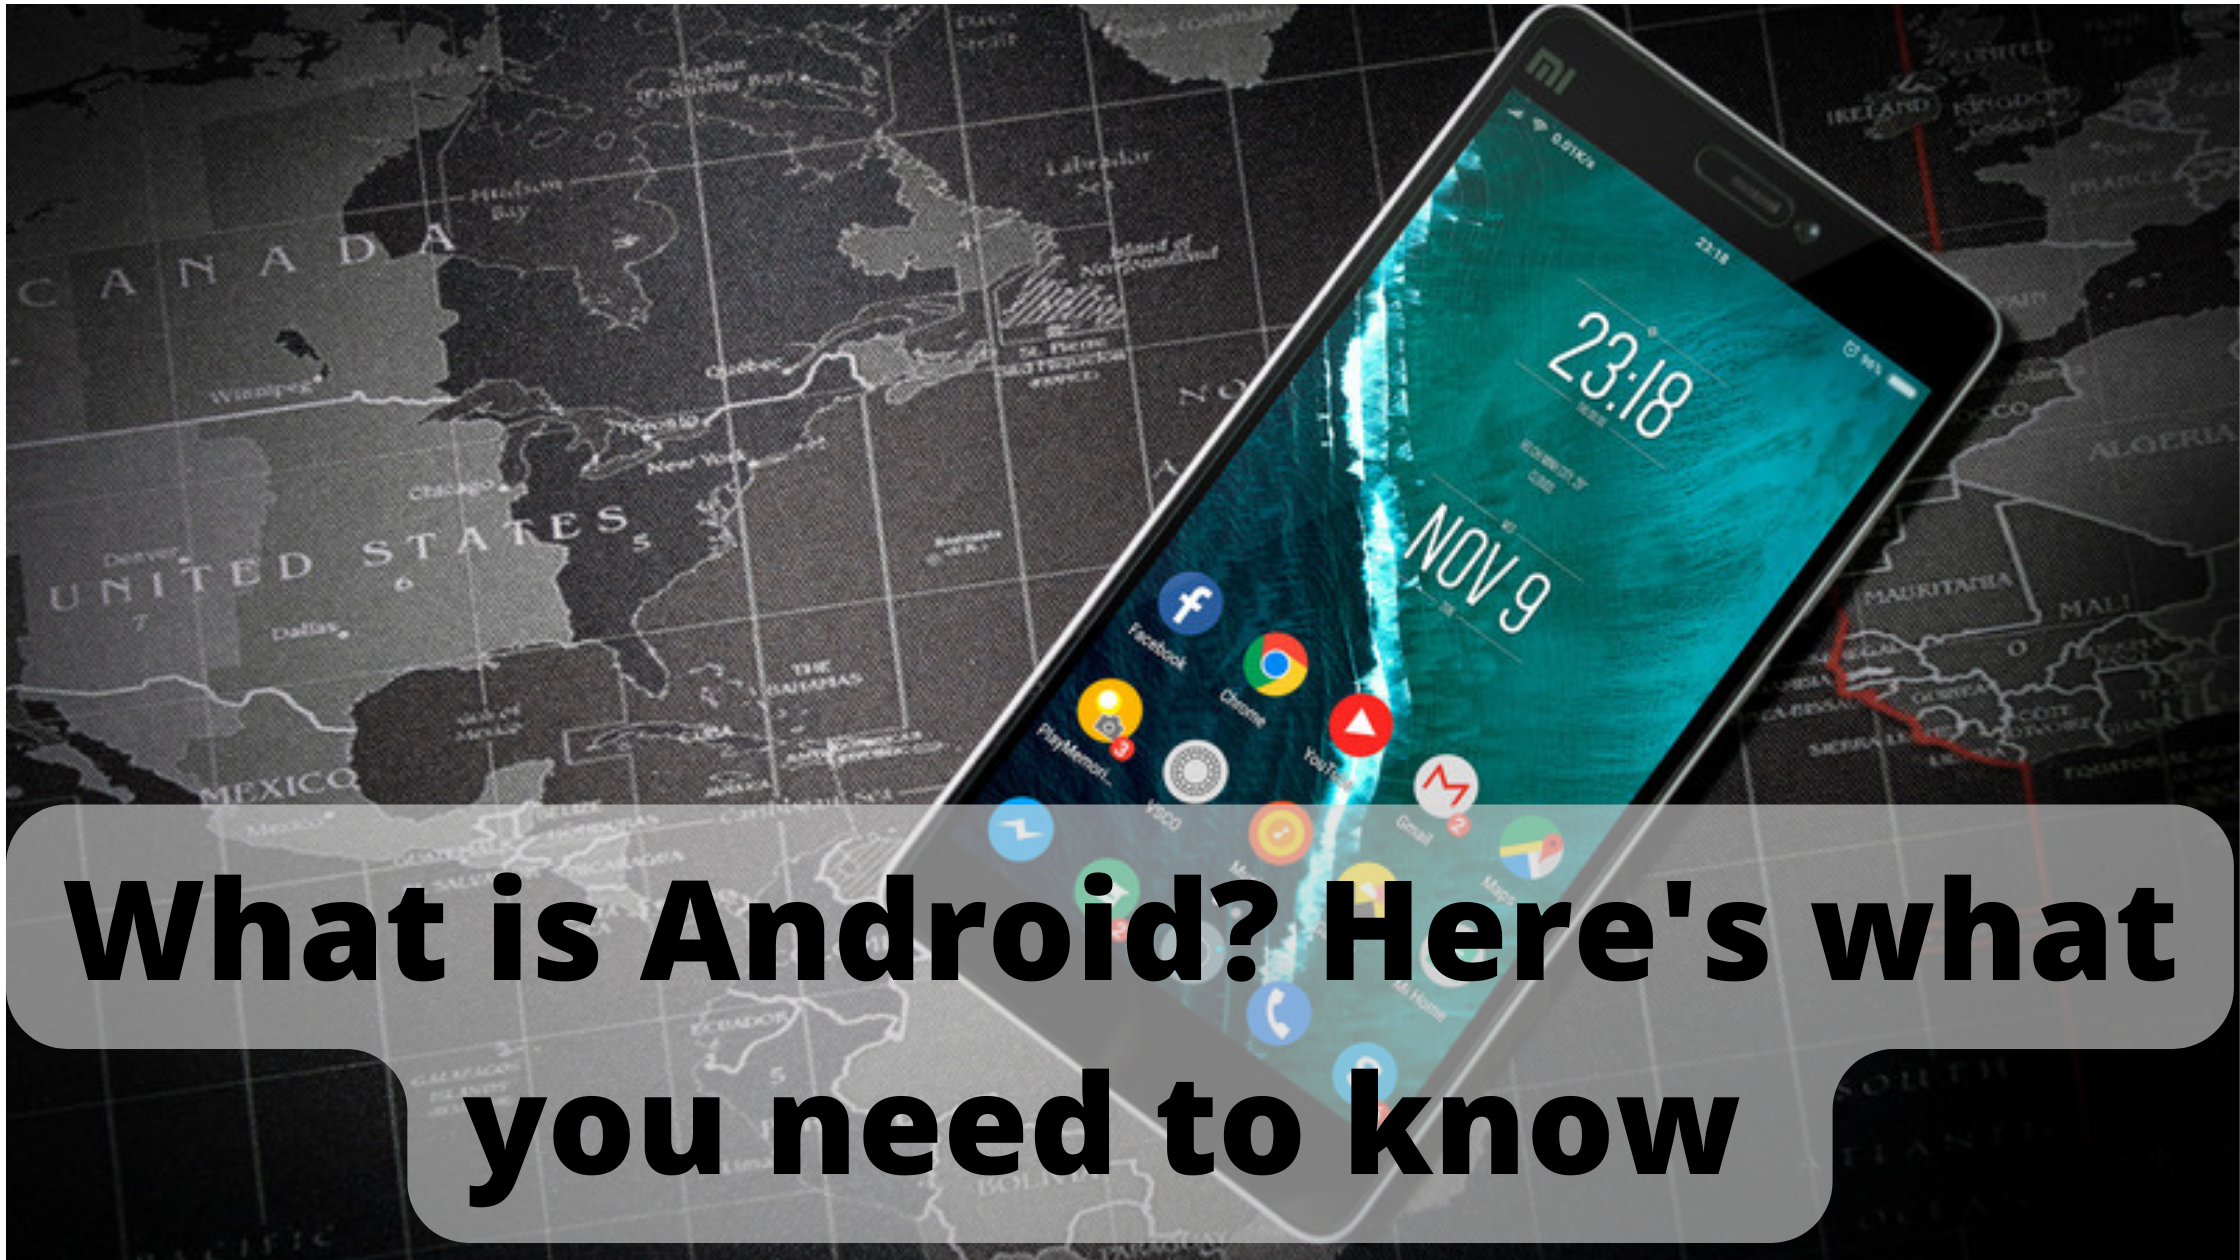 What is Android? Here's what you need to know